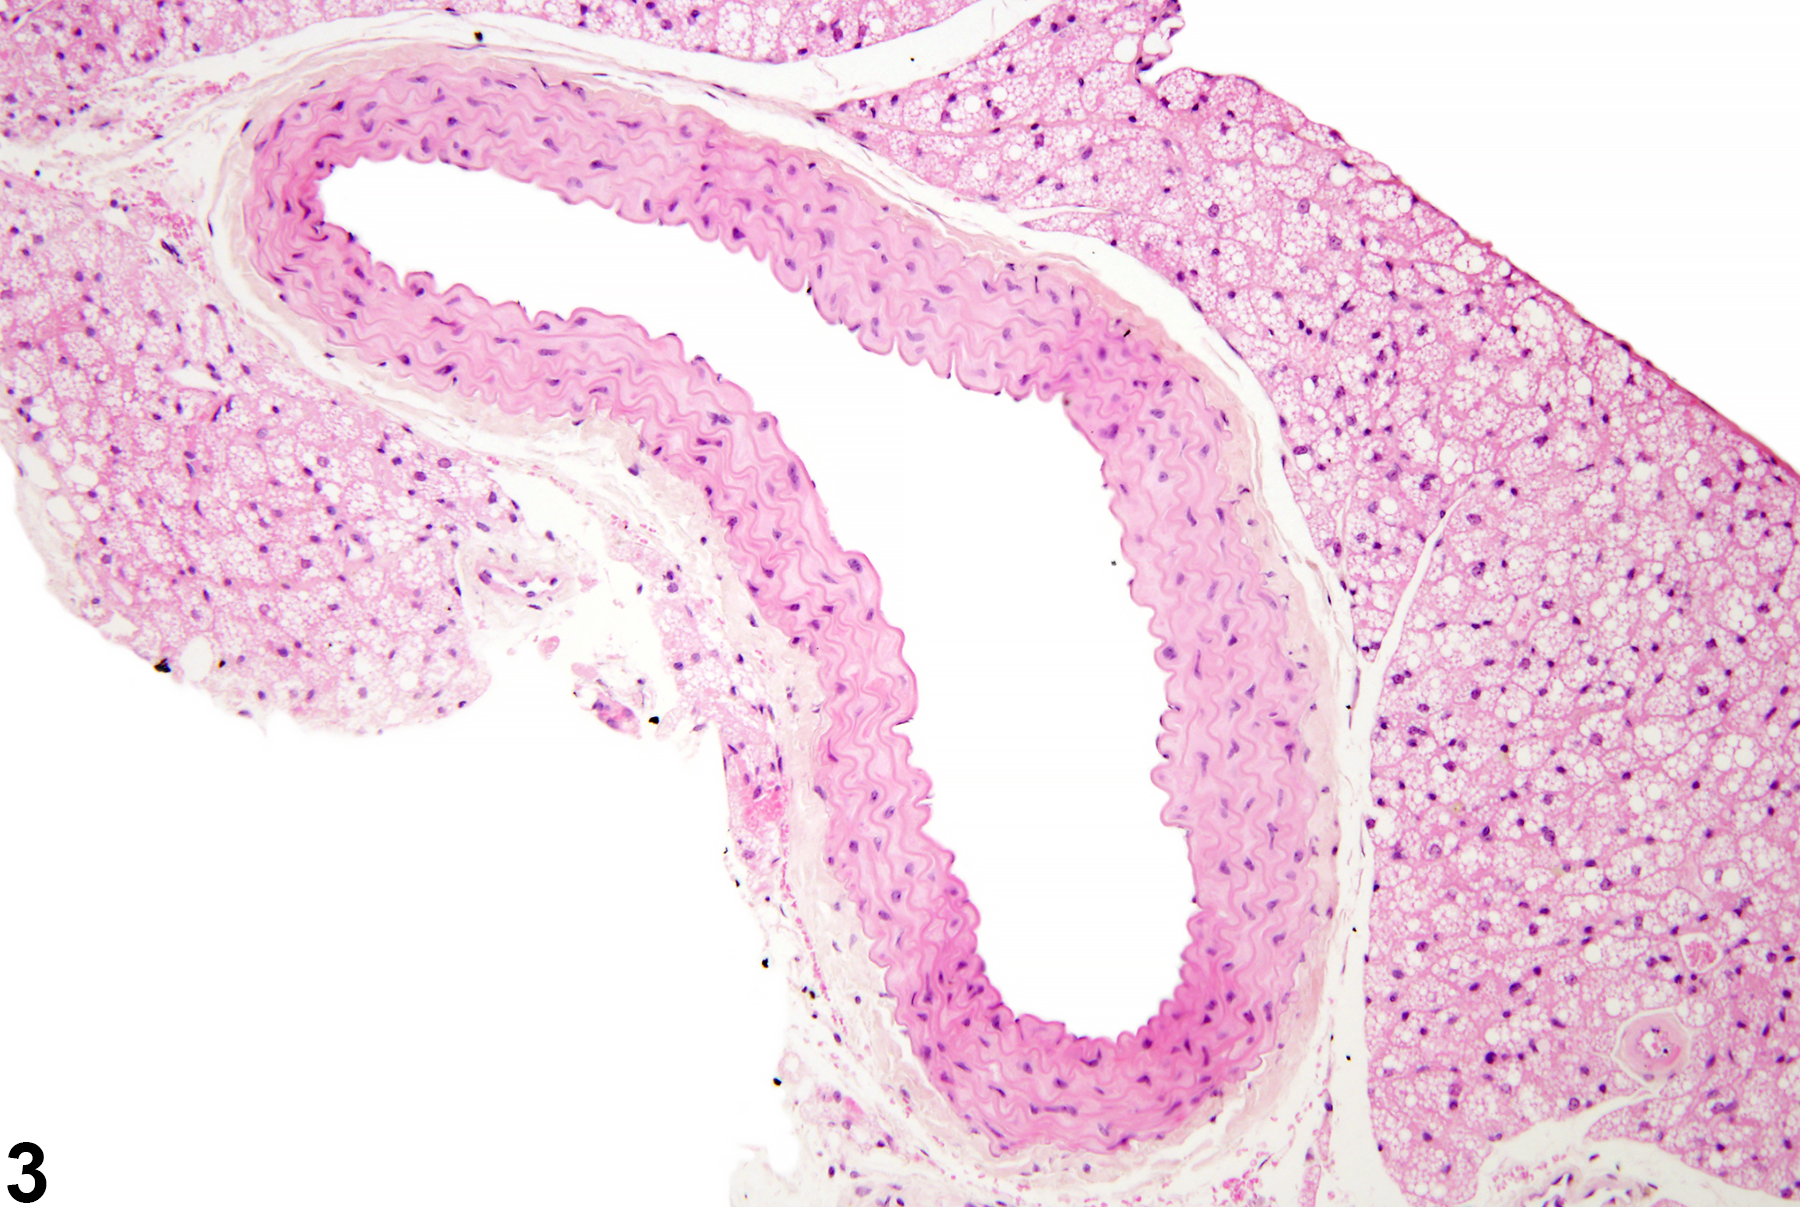 Image of normal in the blood vessel from a male B6C3F1/N mouse in a chronic study